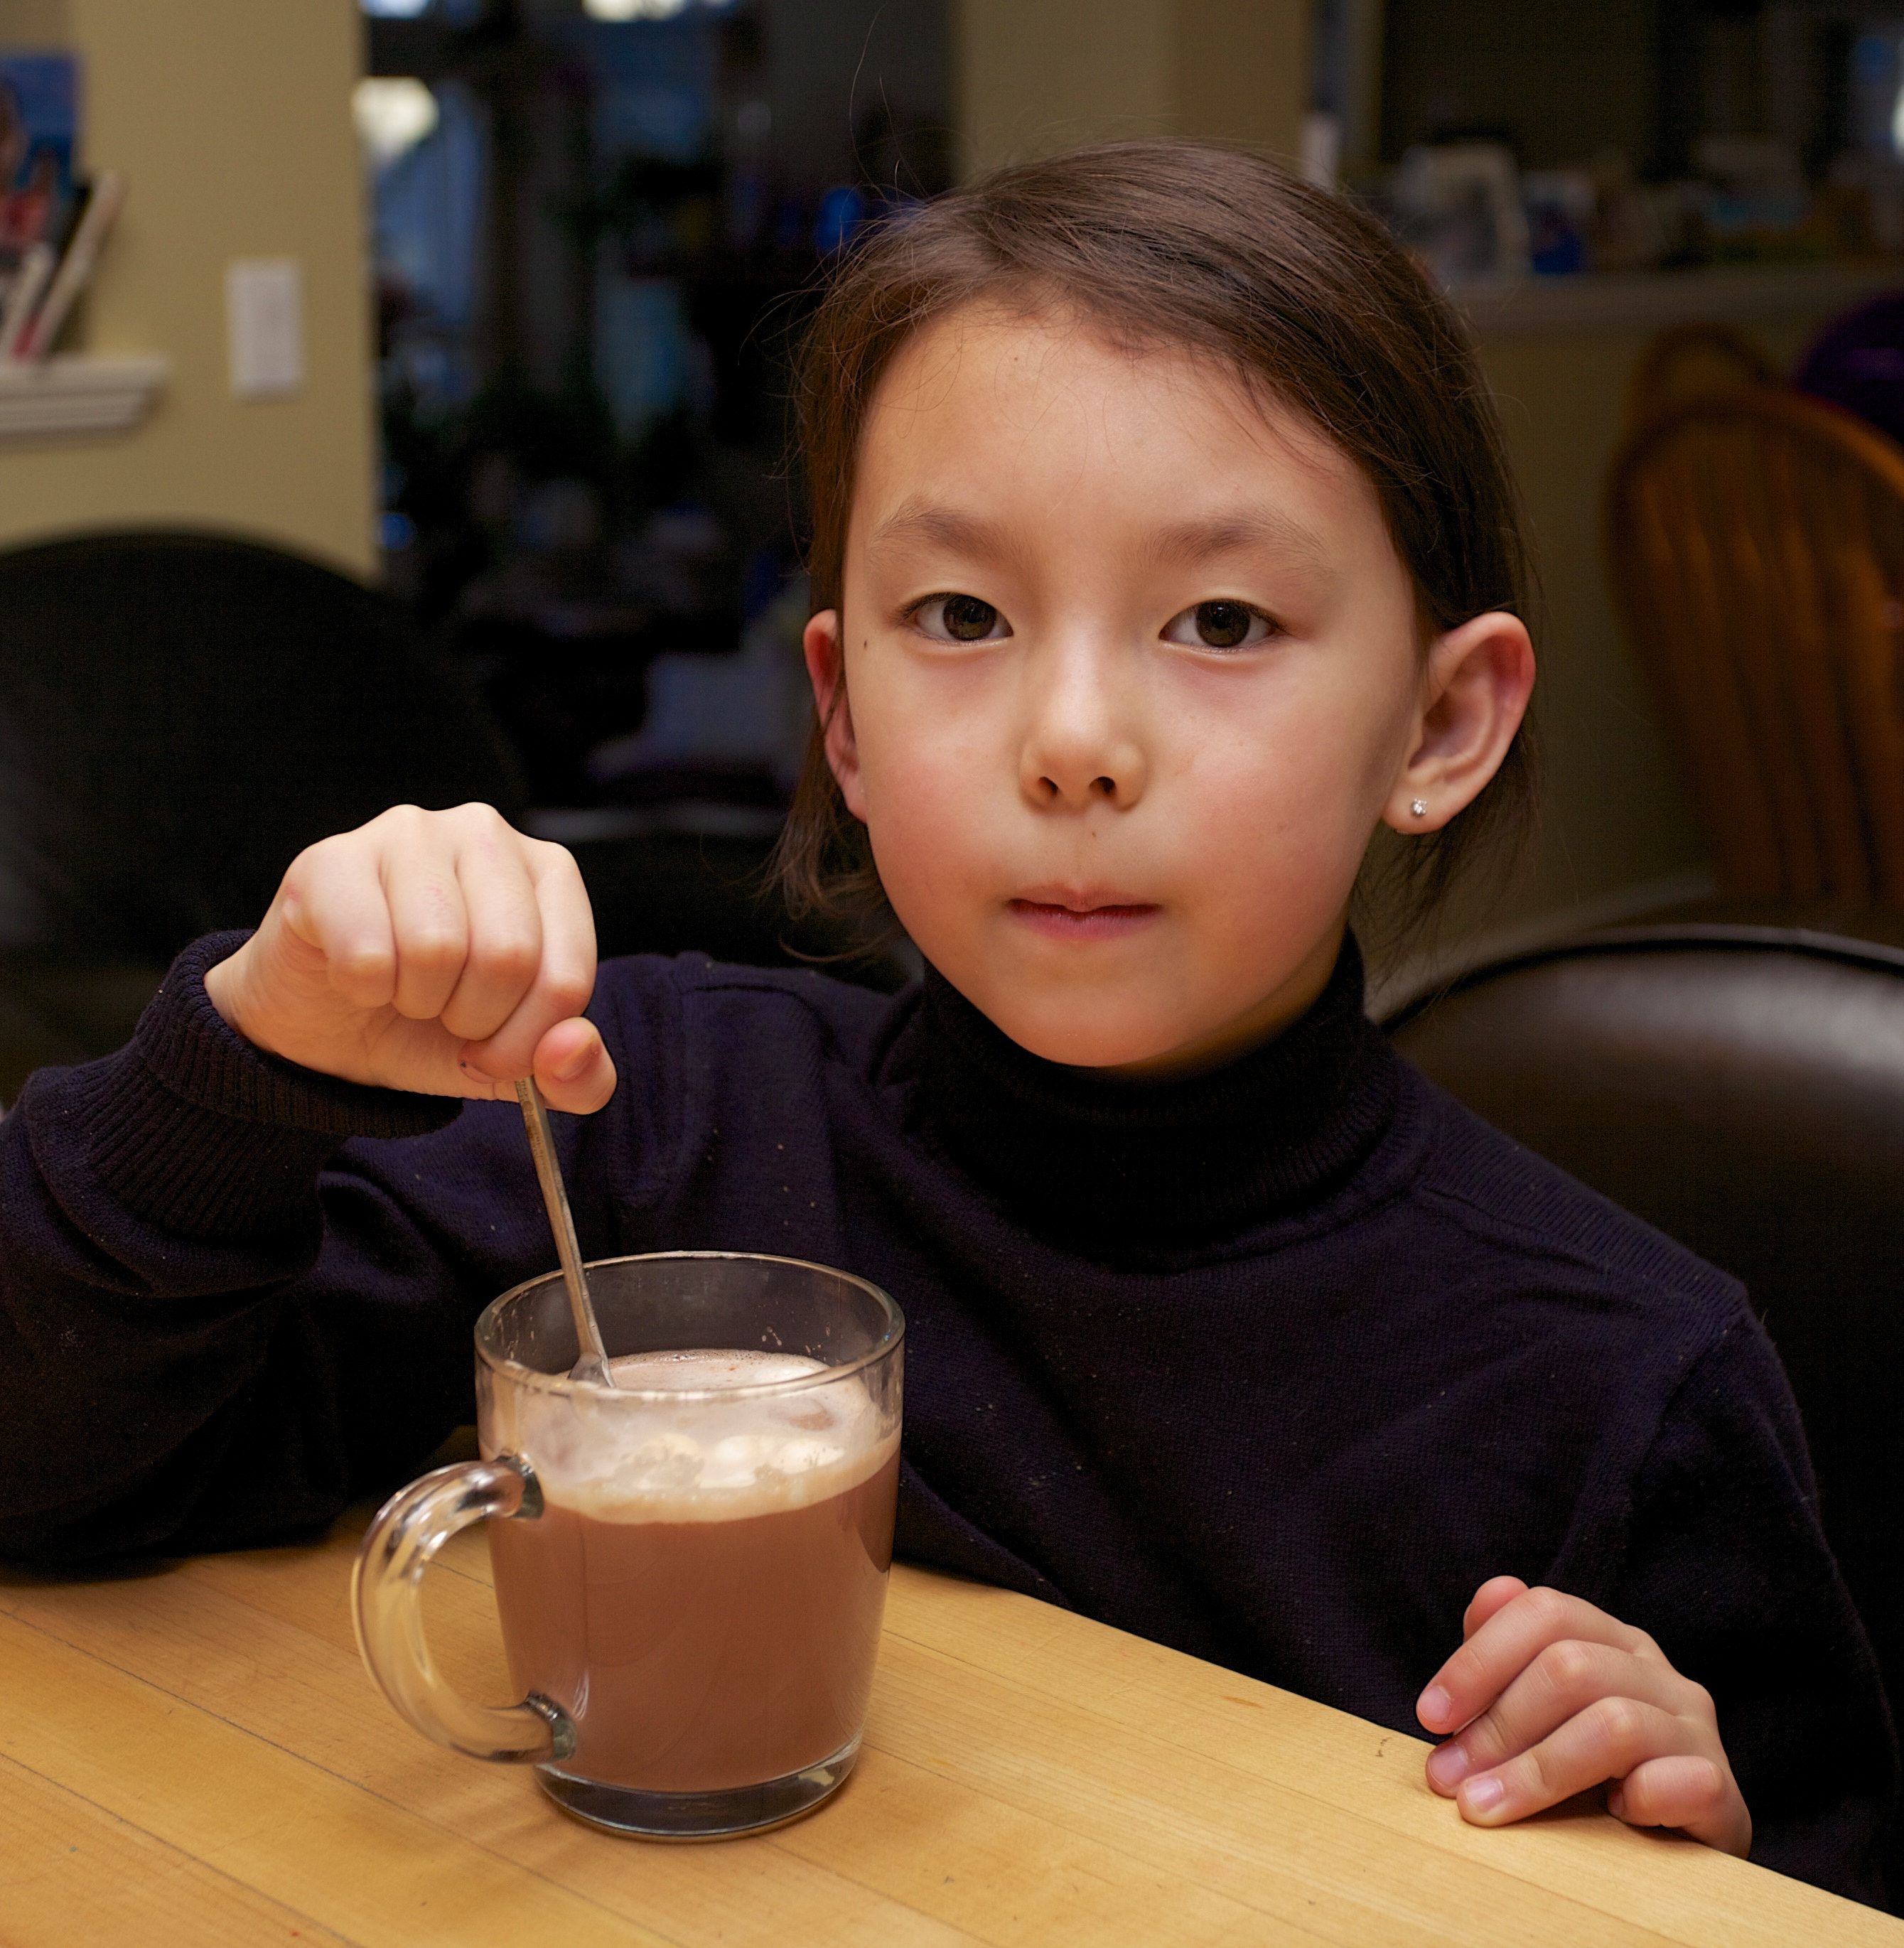 Child stares into the camera while stirring hot chocolate